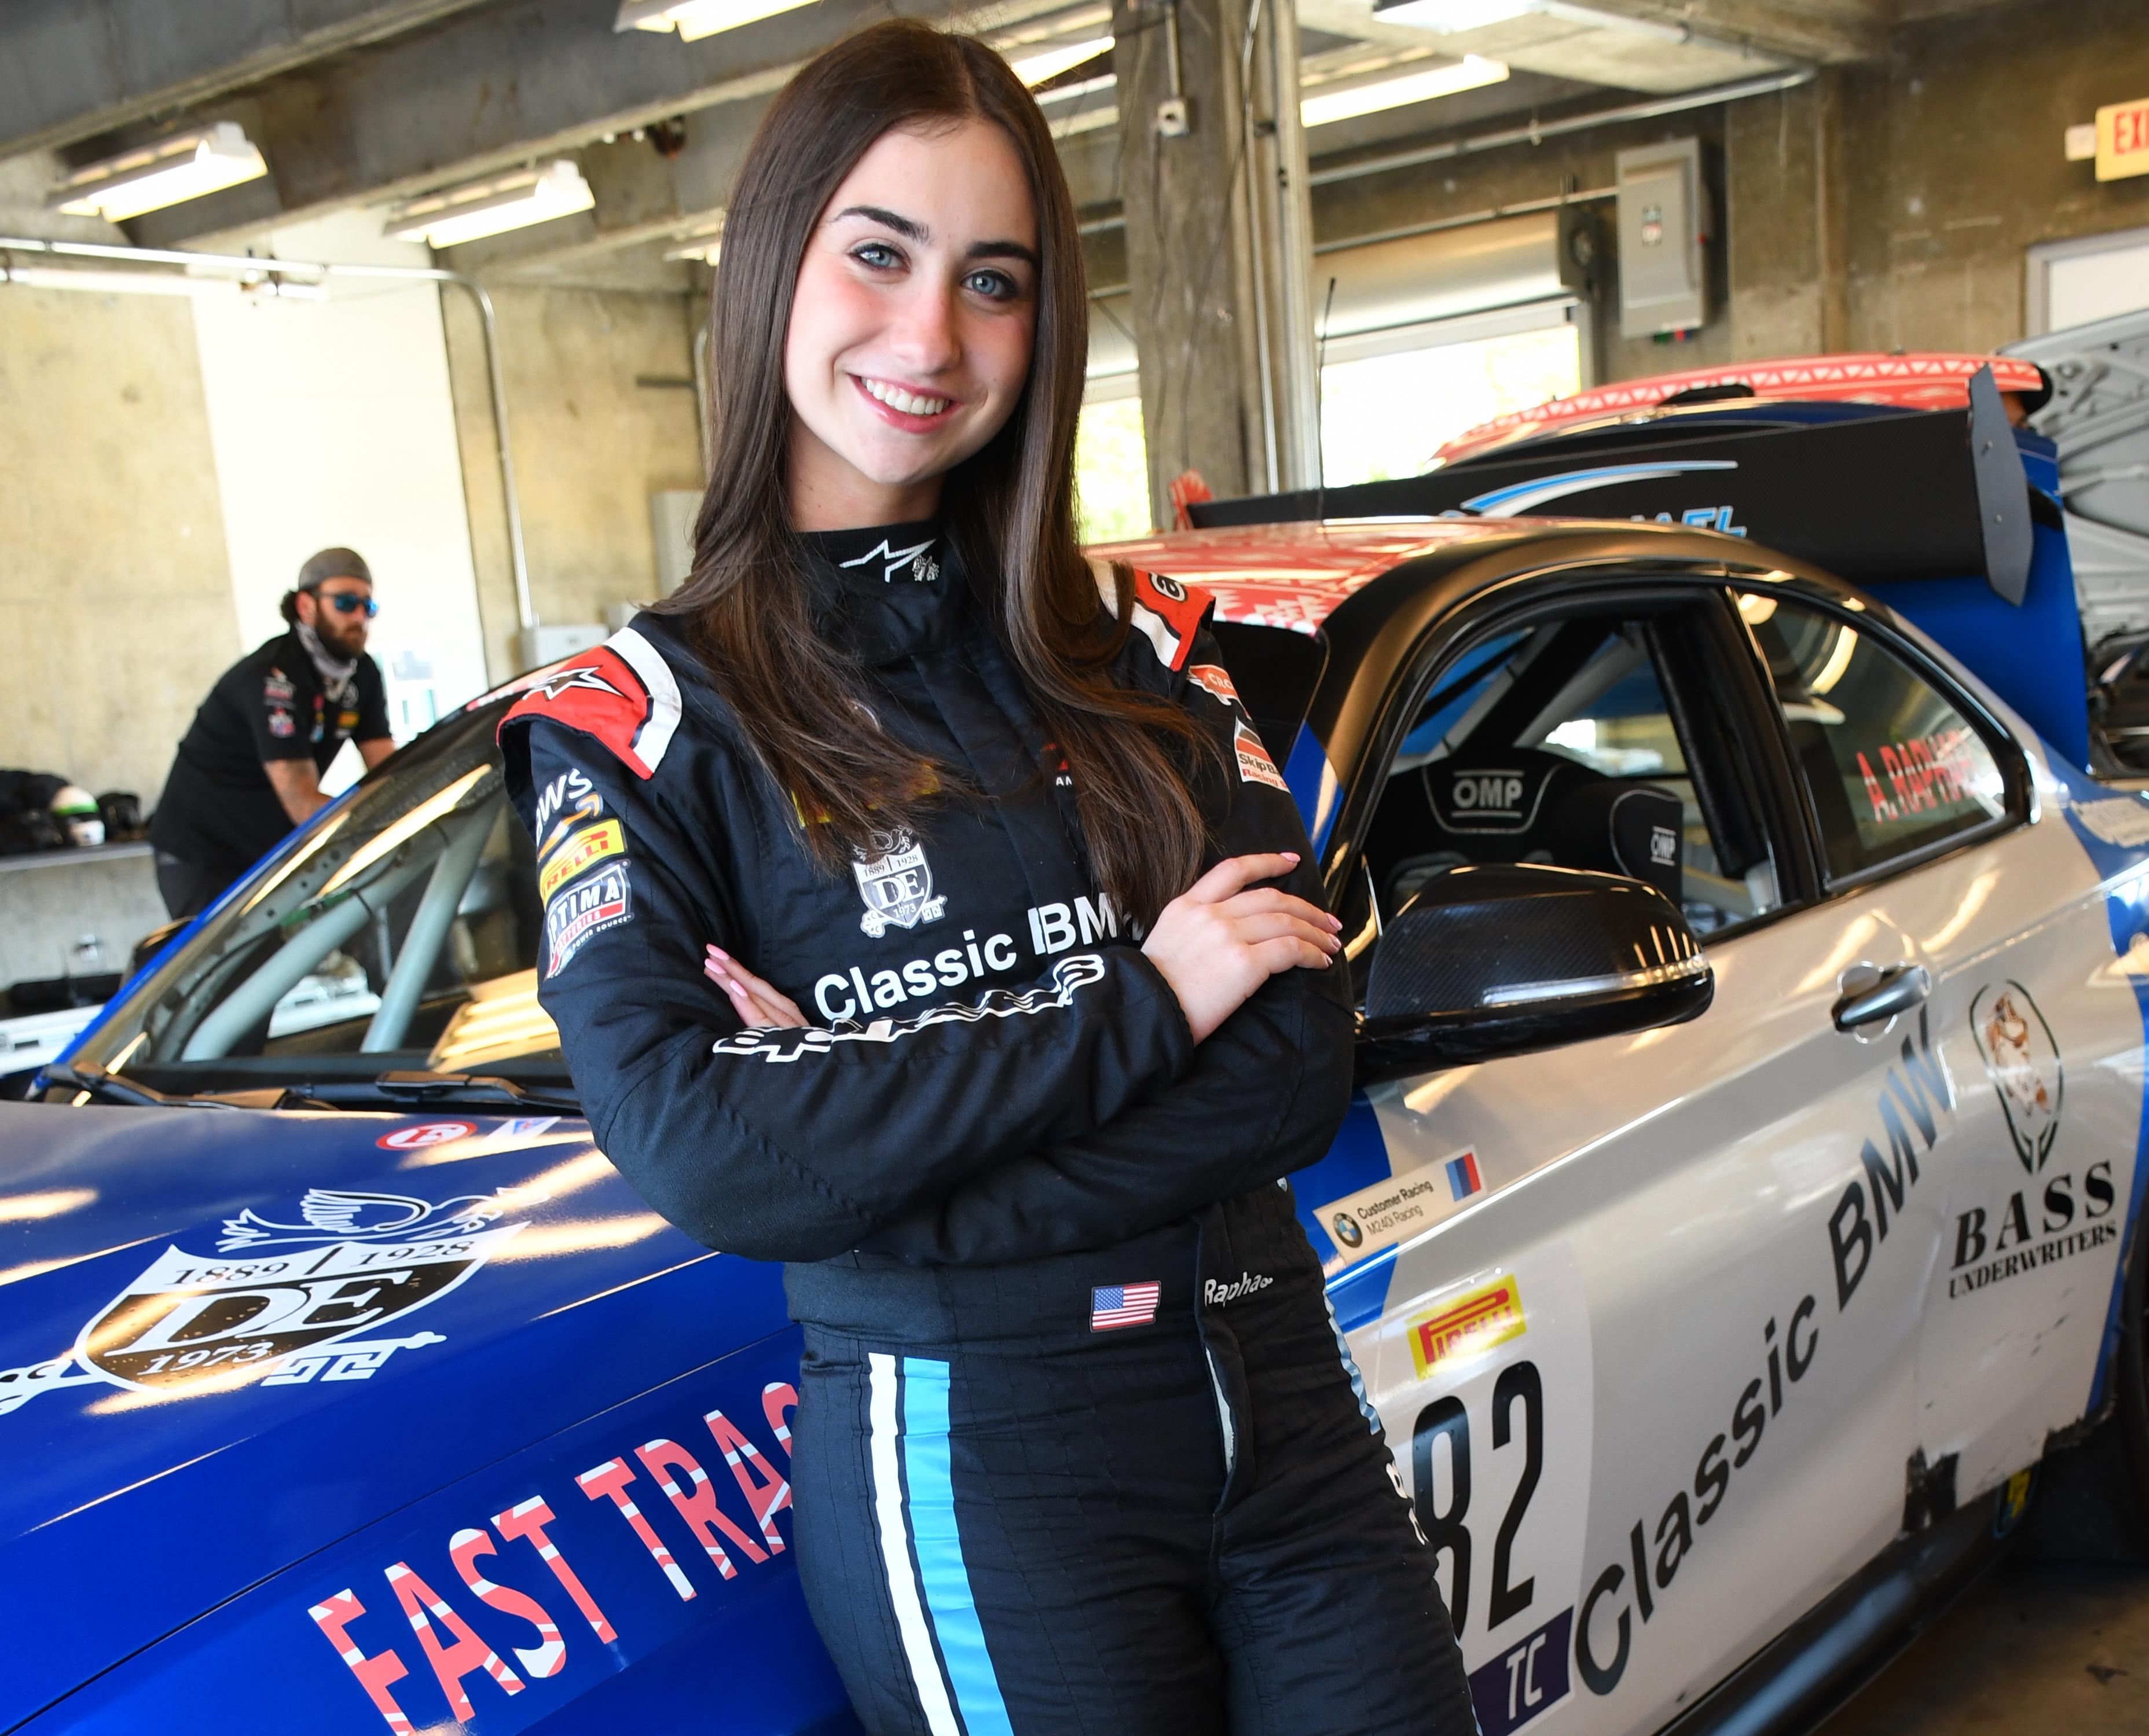 For University of Richmond sophomore Ally Raphael, driving competitively is a family affair